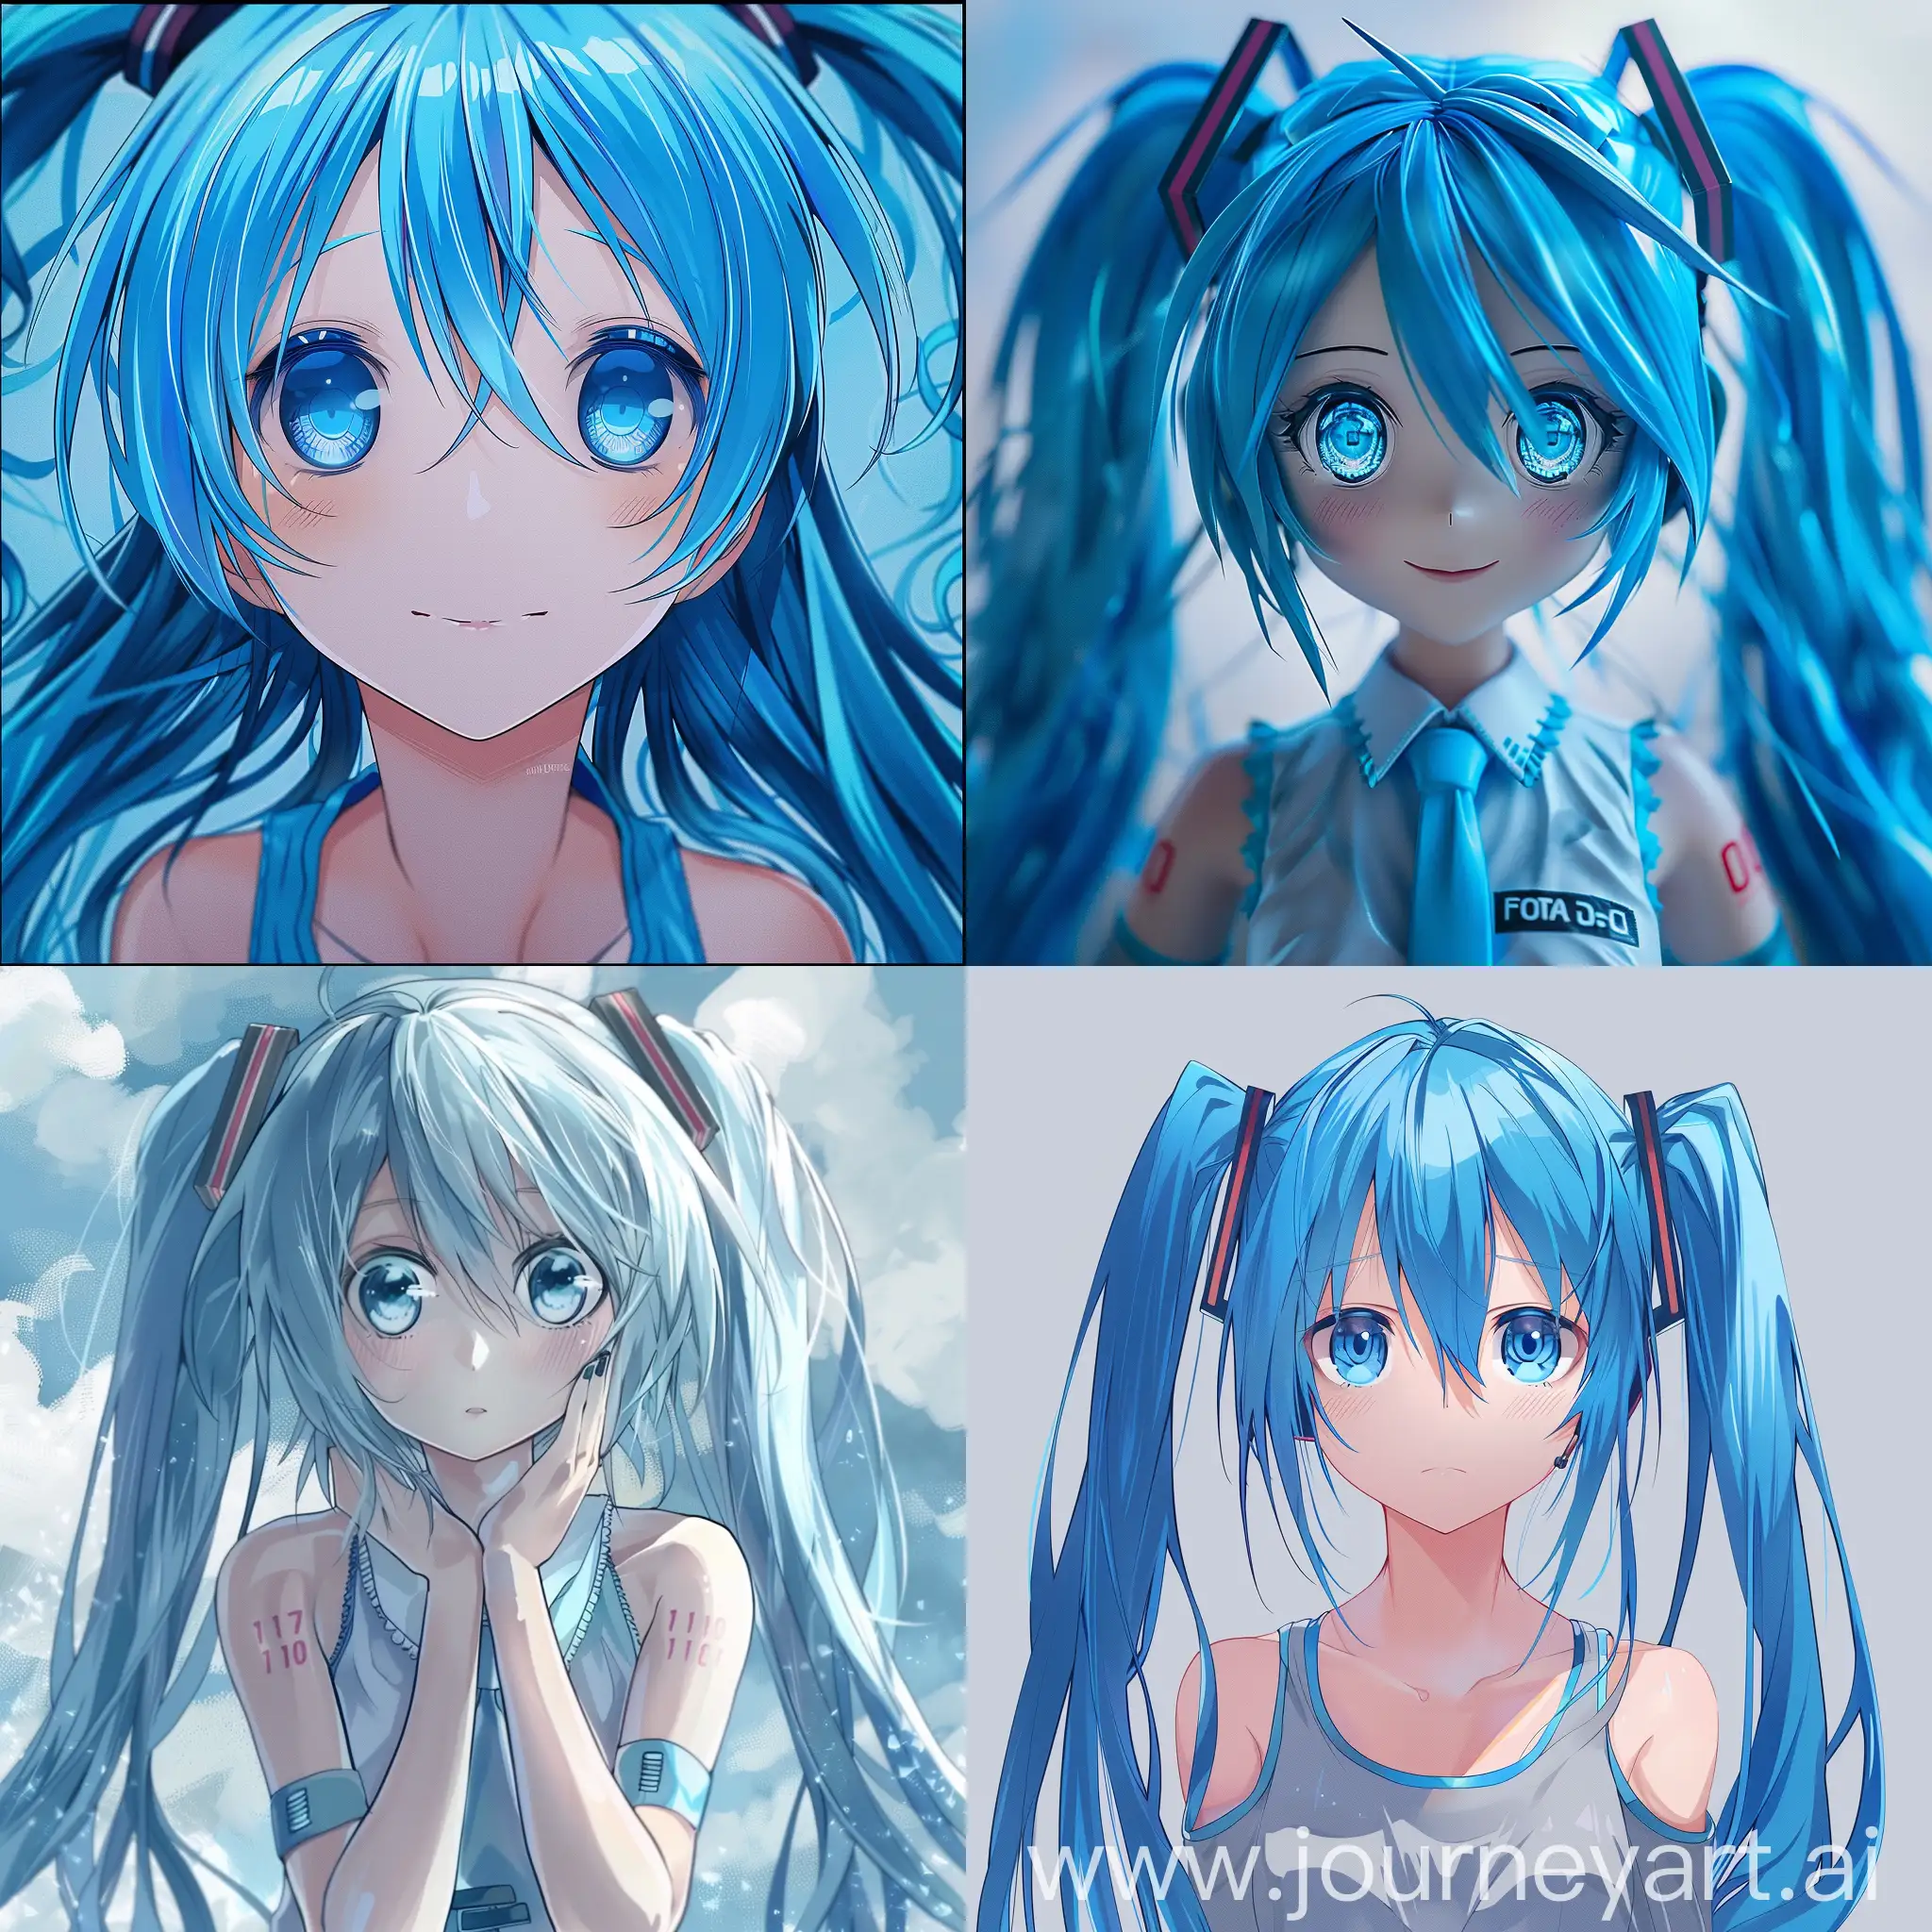 Hatsune-Miku-with-Long-Blue-Hair-and-Blue-Eyes